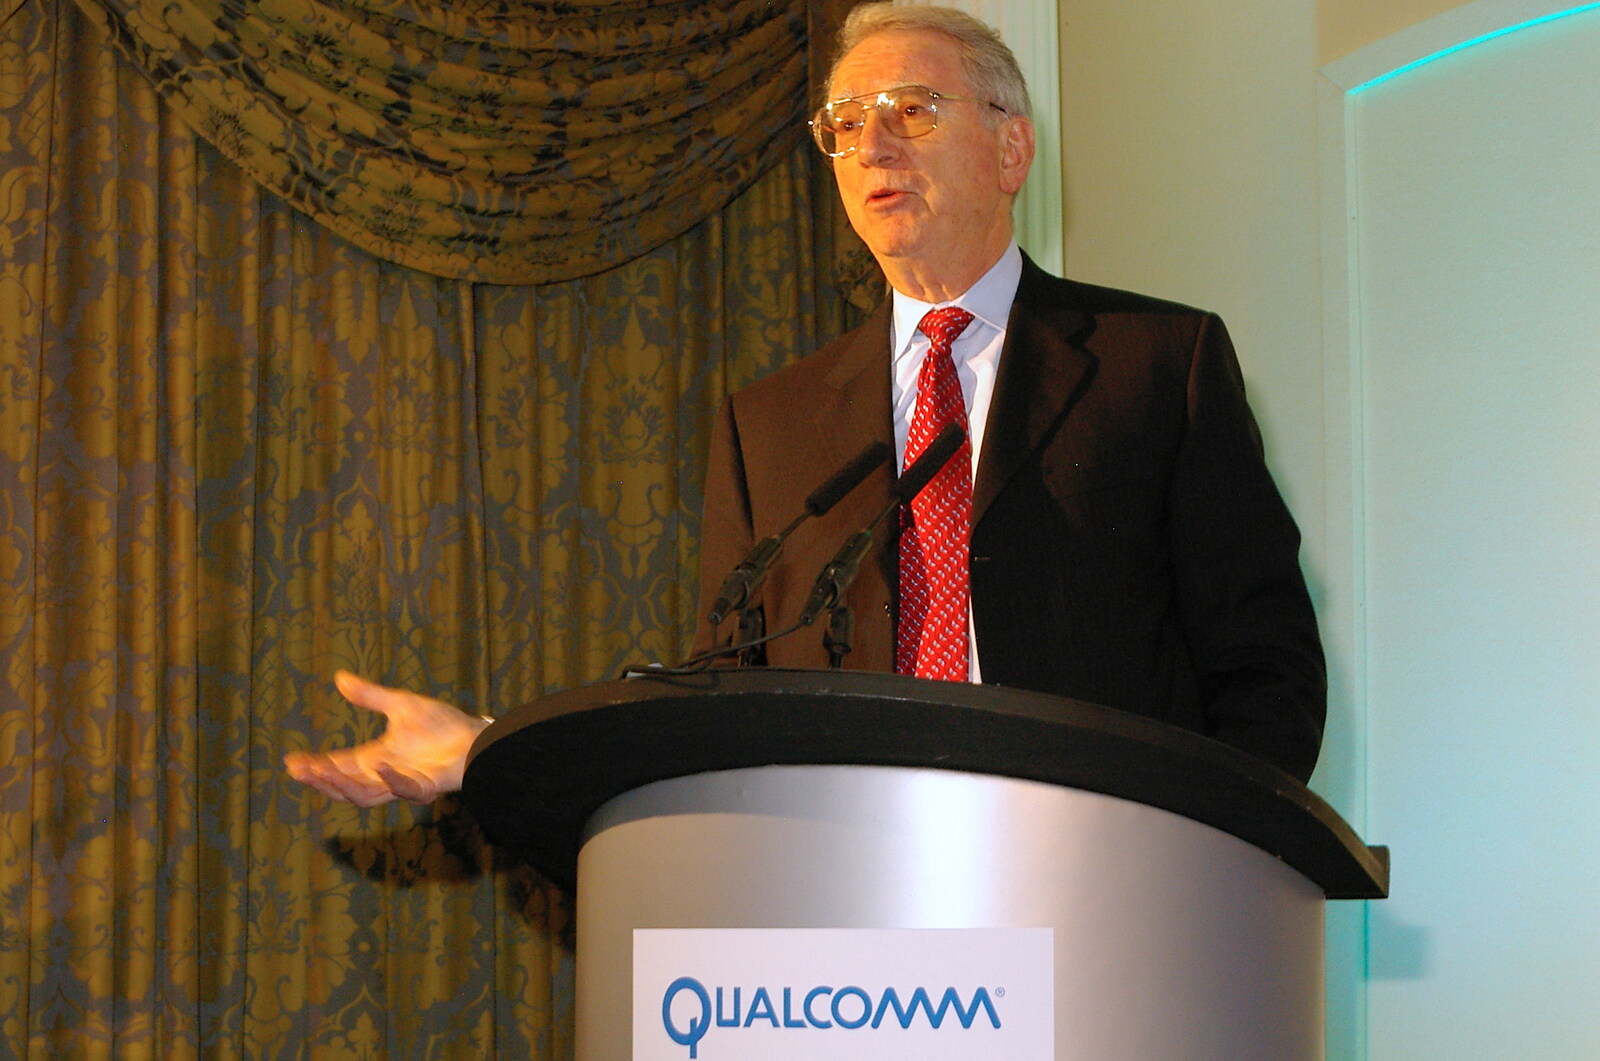 Retired CEO Dr. Irwin Jacobs from Qualcomm Europe All-Hands at the Berkeley Hotel, London - 9th November 2005